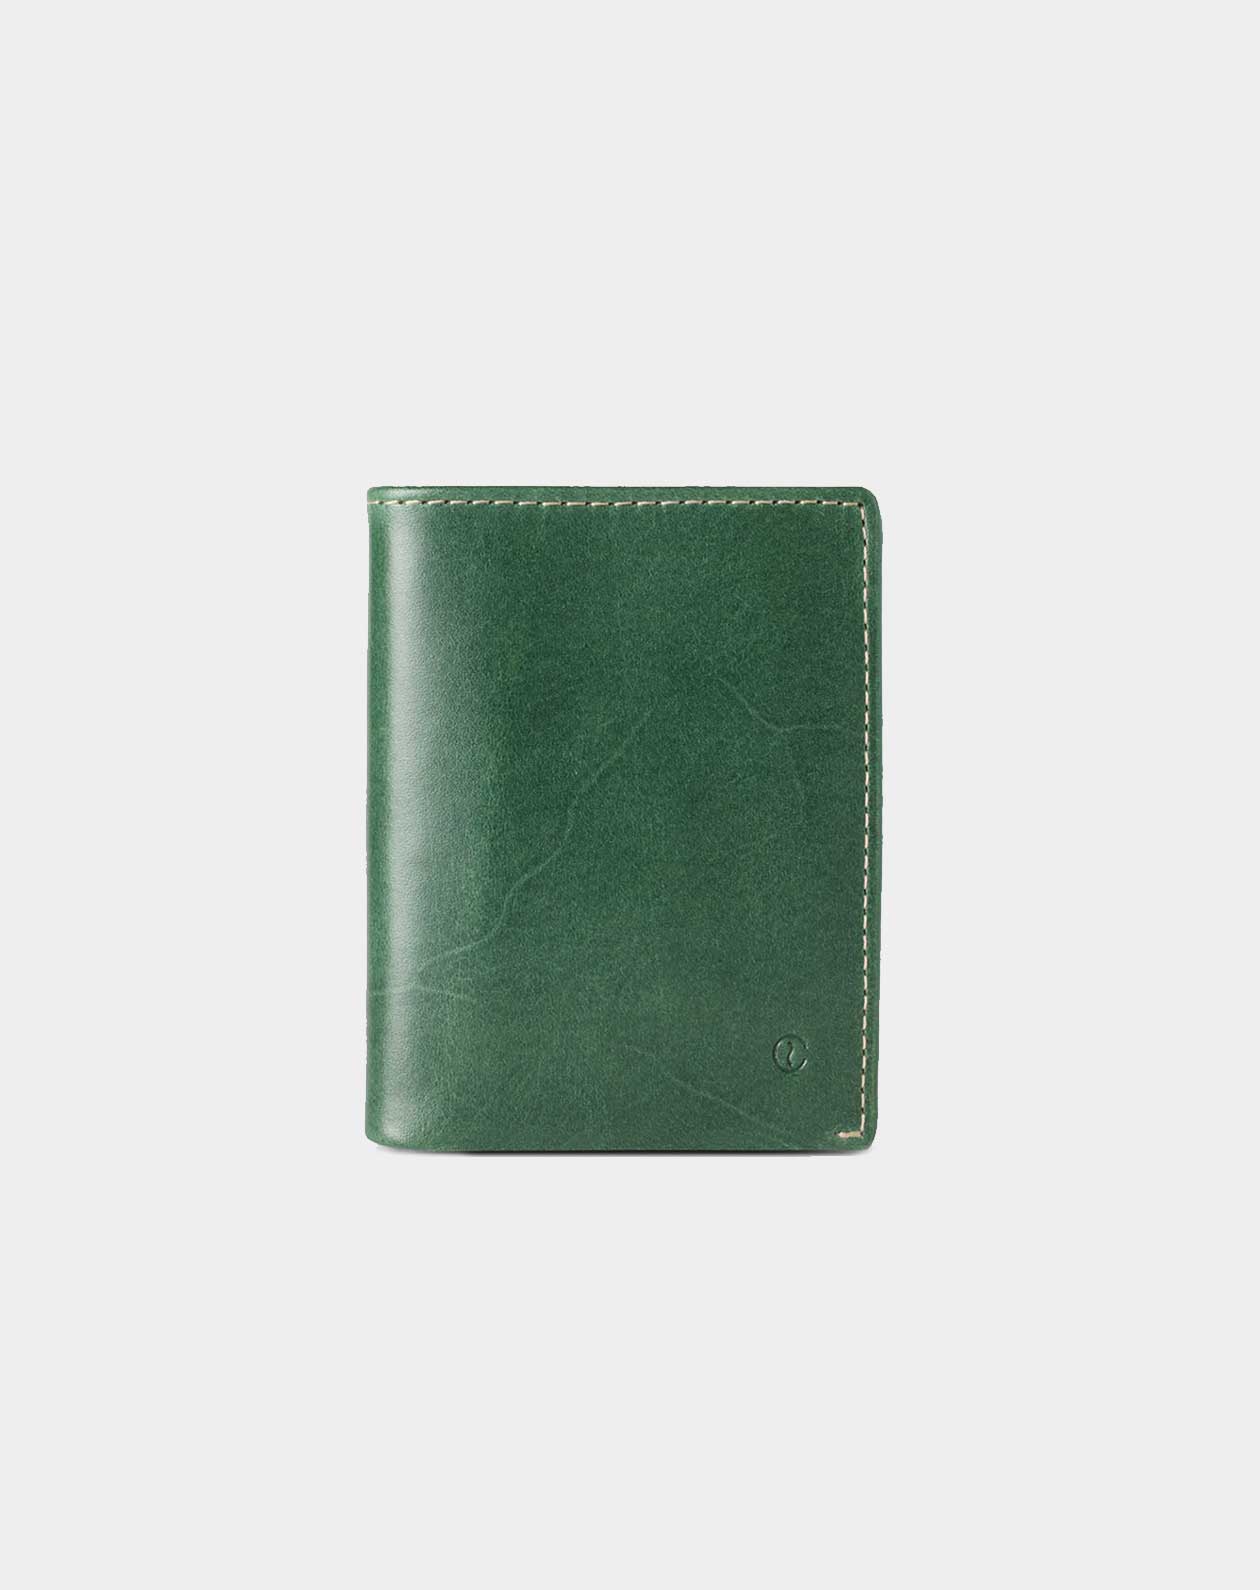 leather wallet slim green for coins and bills